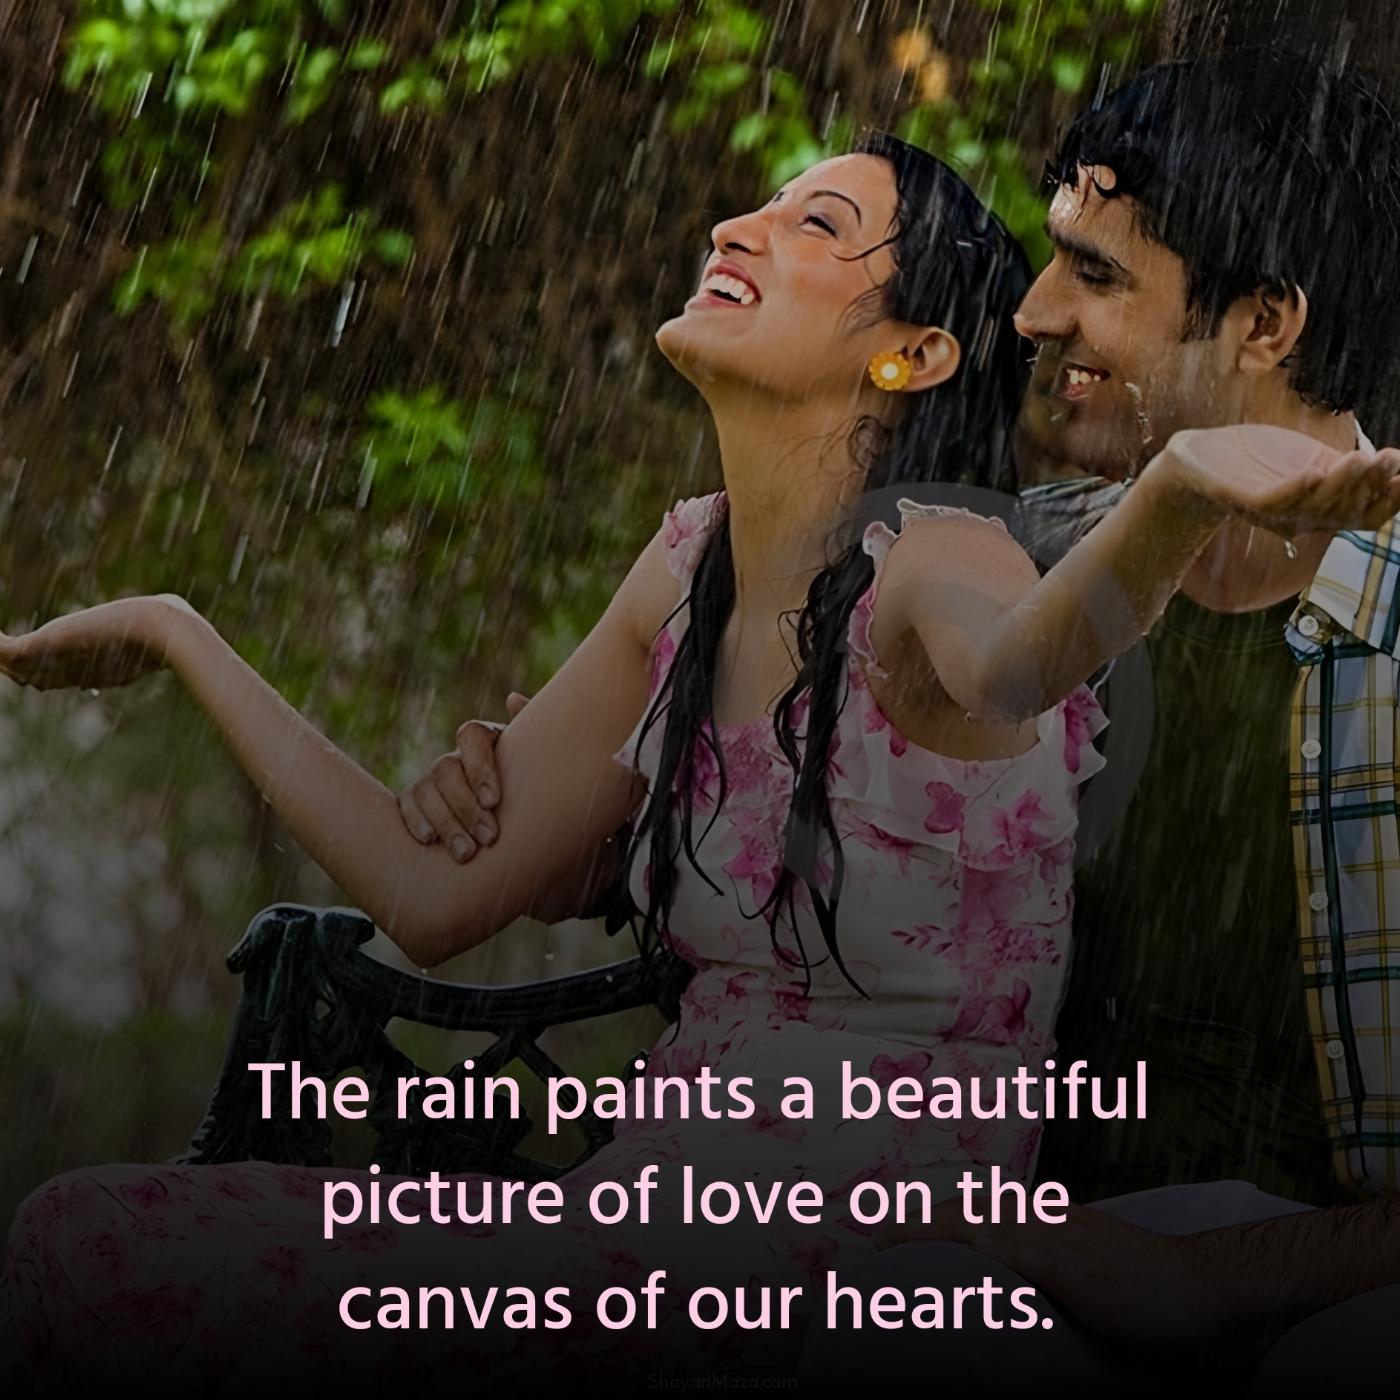 The rain paints a beautiful picture of love on the canvas of our hearts